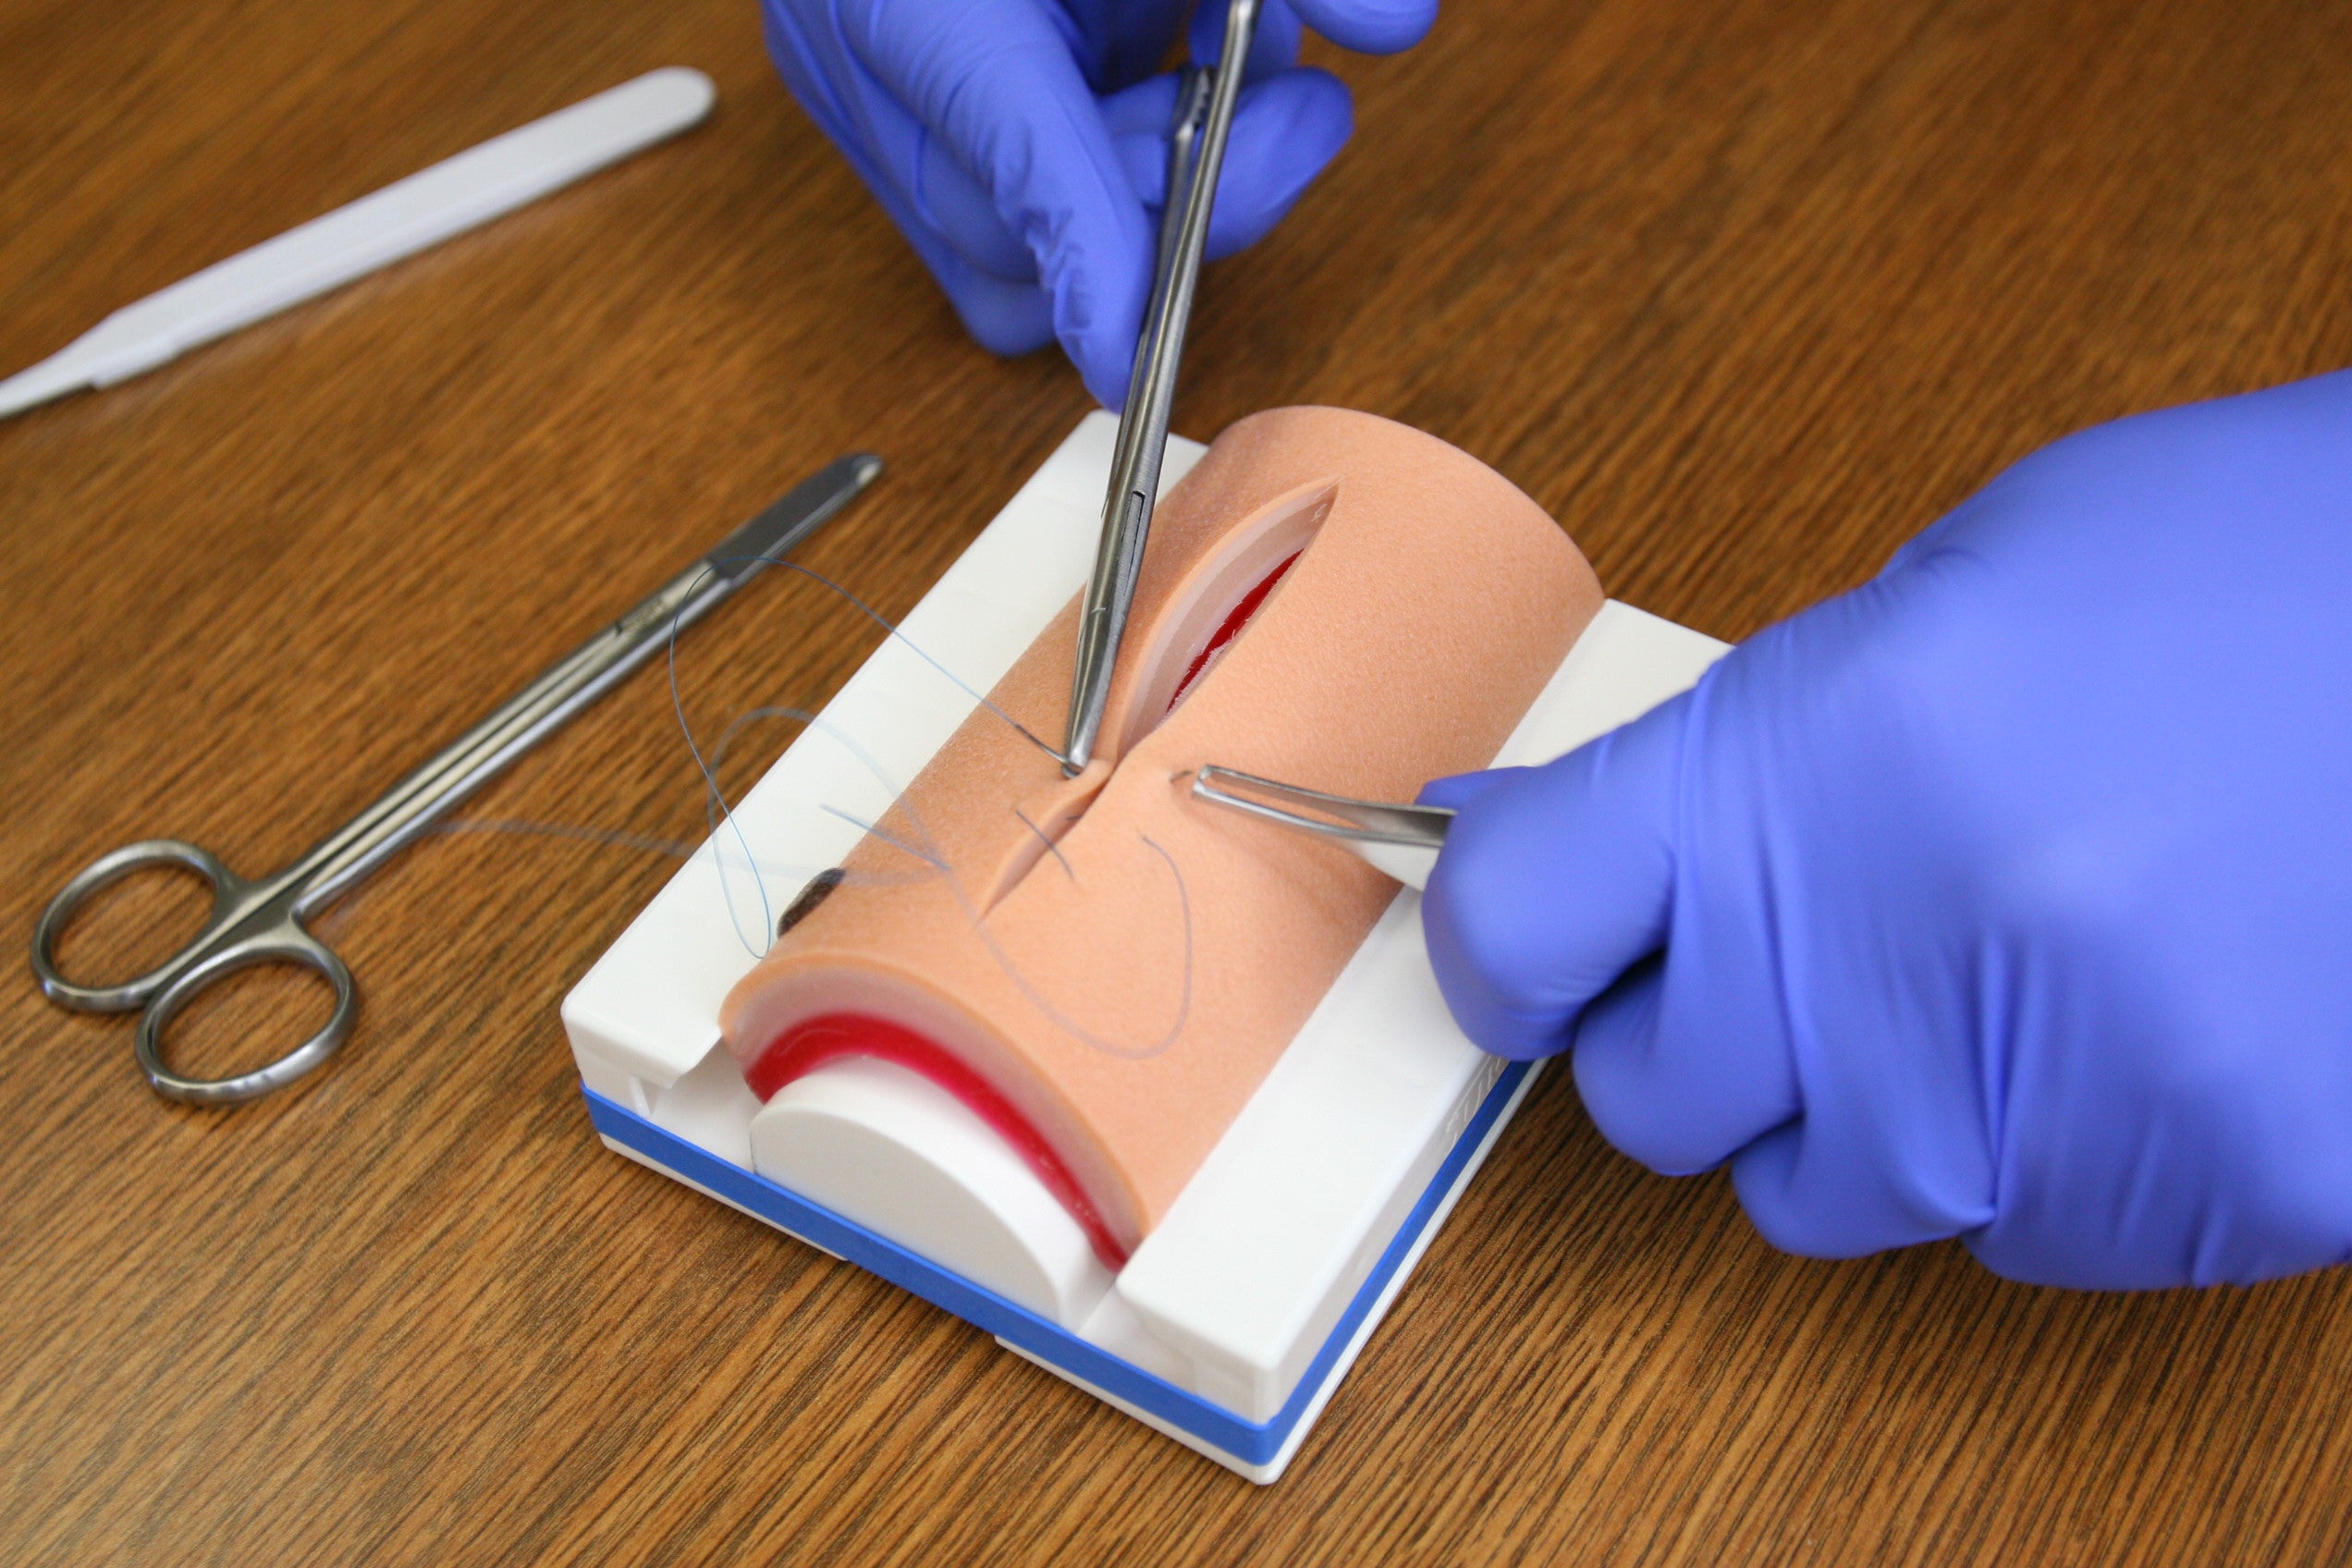 Benefits of Maximizing Suture Pad Reusability for Student Use